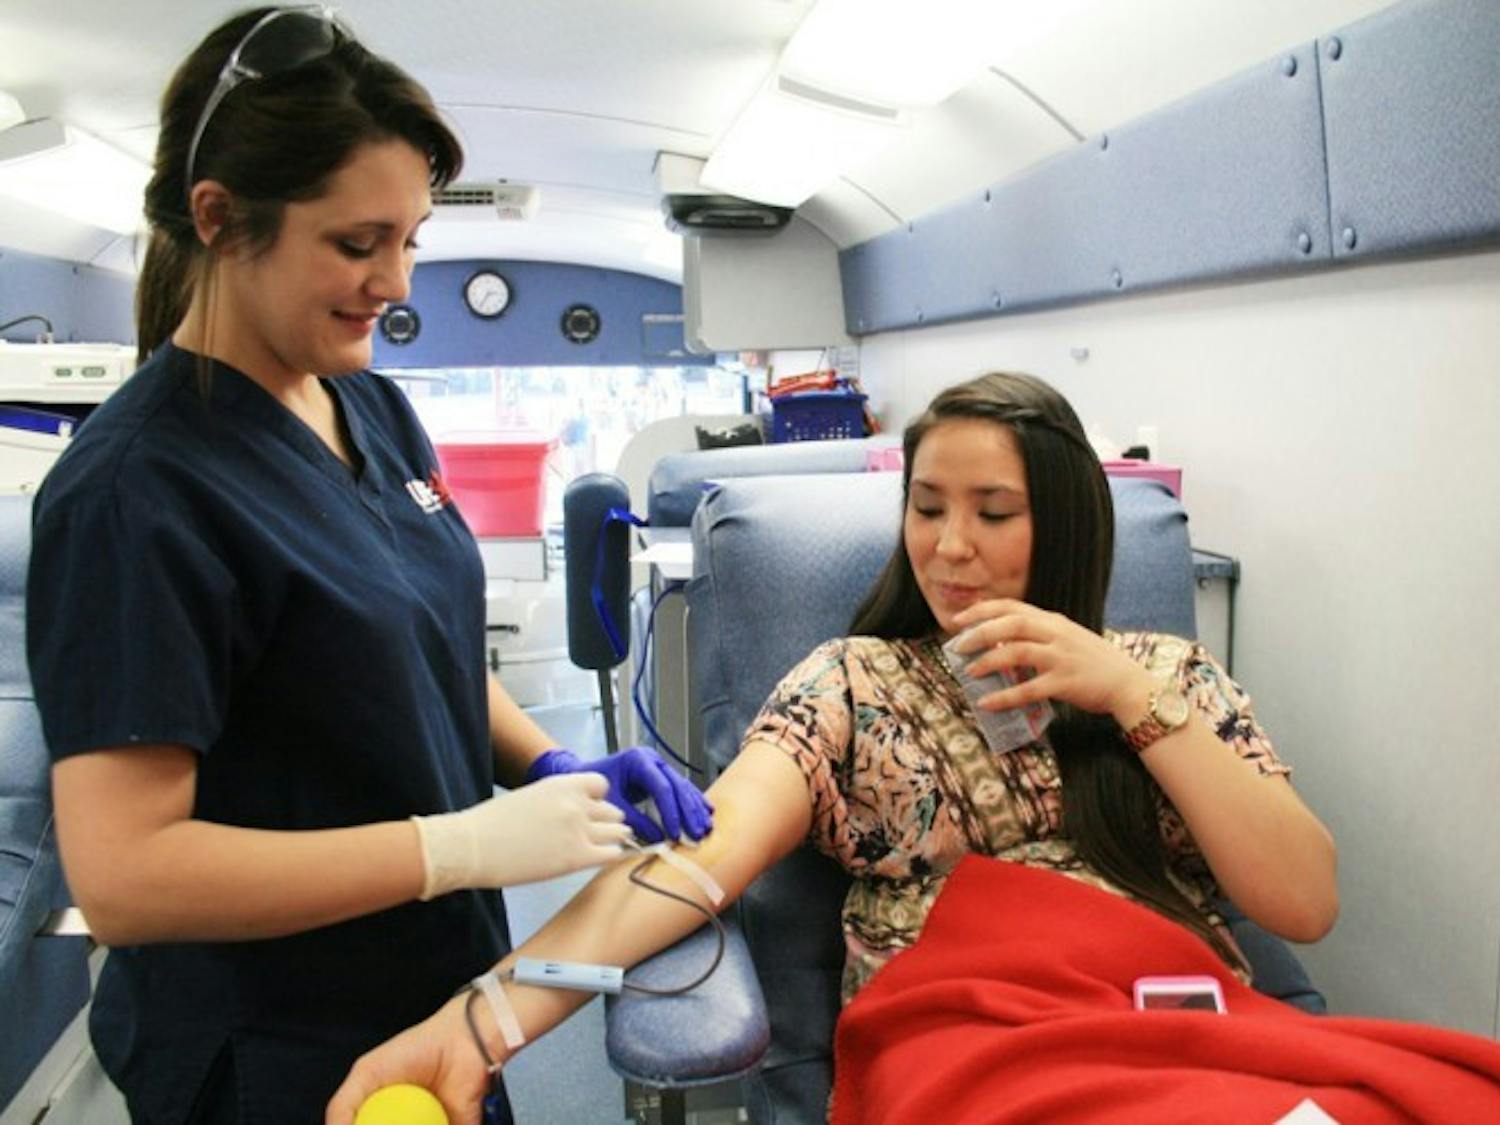 Santa Fe criminal justice junior Samantha Baker, 21, takes blood from UF advertising sophomore Tiffany Sanders, 19, who said she has given blood every two months since she started attending UF. "It's easy to just come in when you have a break from class," Sanders said.